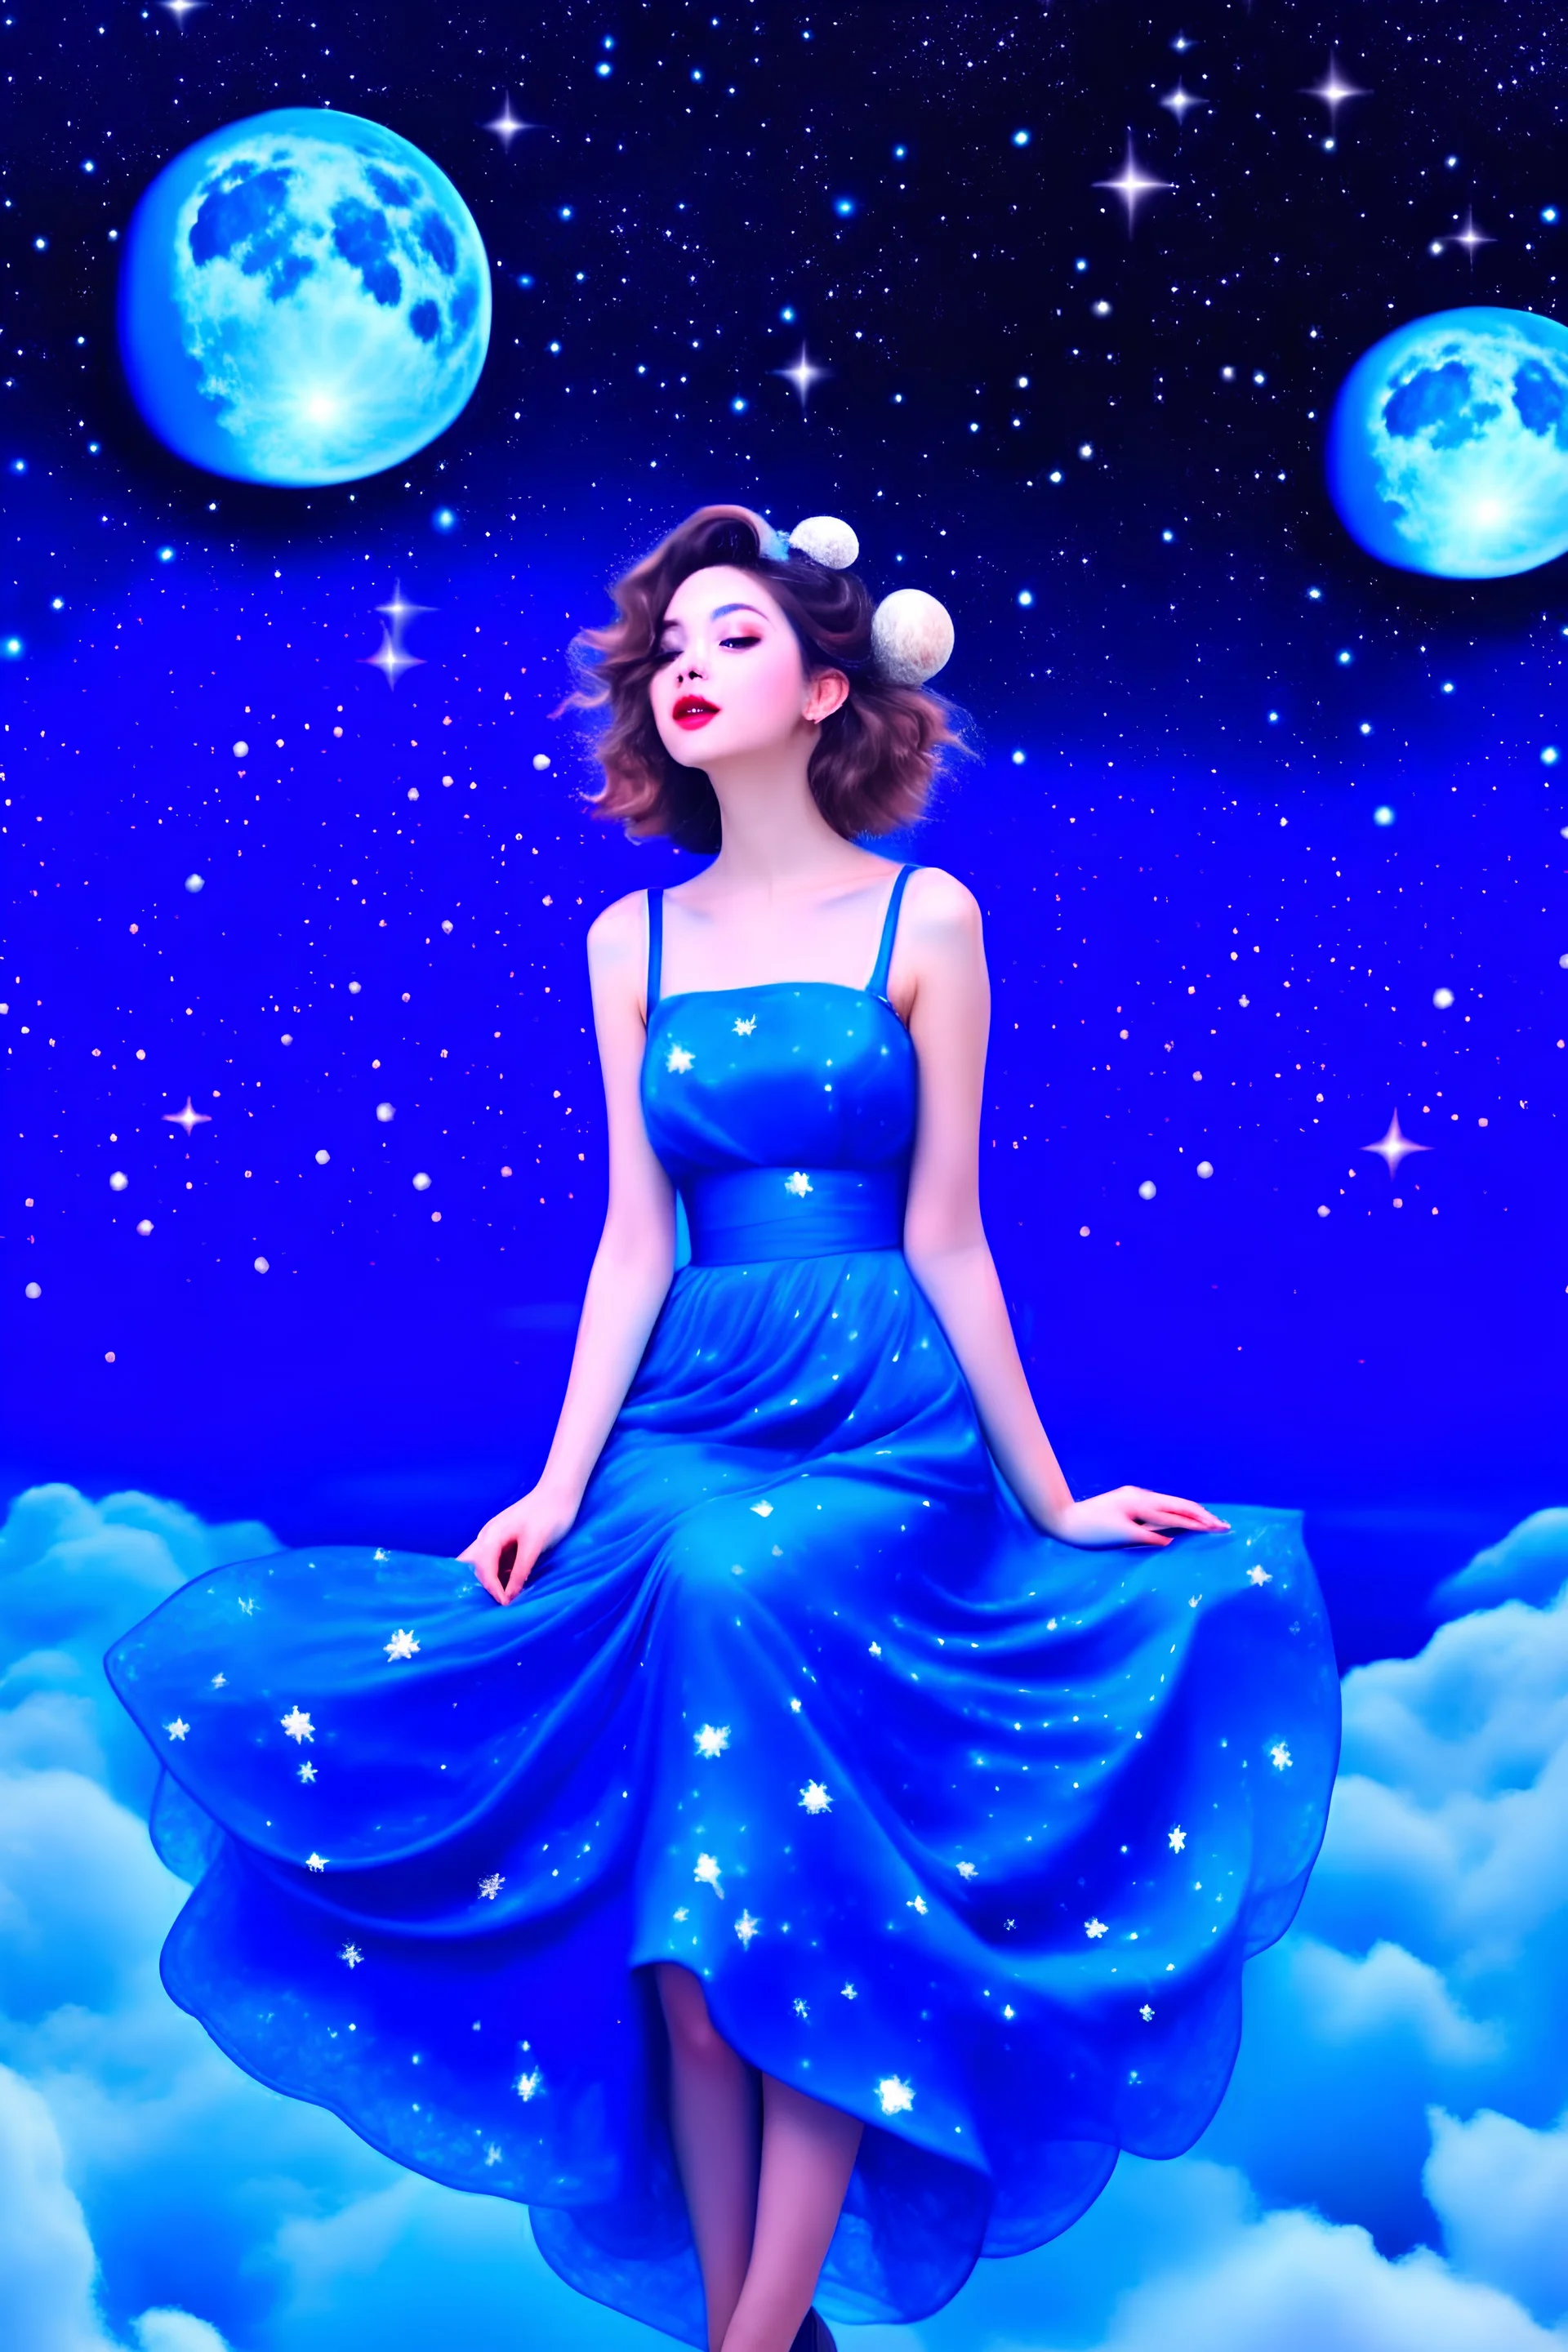 cosmic girl under moonlight Saturn planets stars clouds blue shimmery dress floating